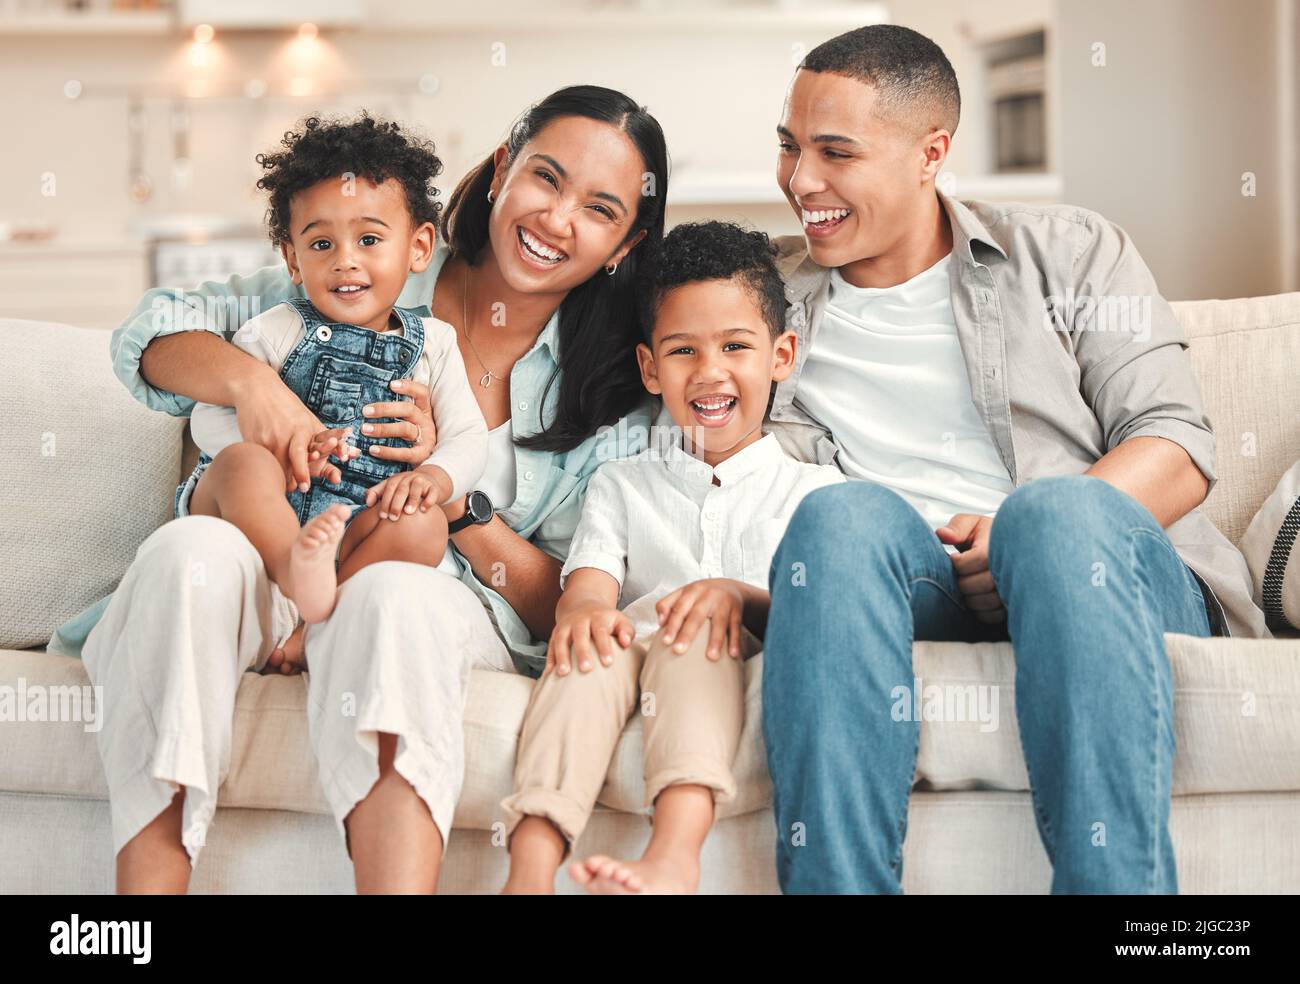 Queen of boys. a young family happily bonding together on the sofa at home. Stock Photo